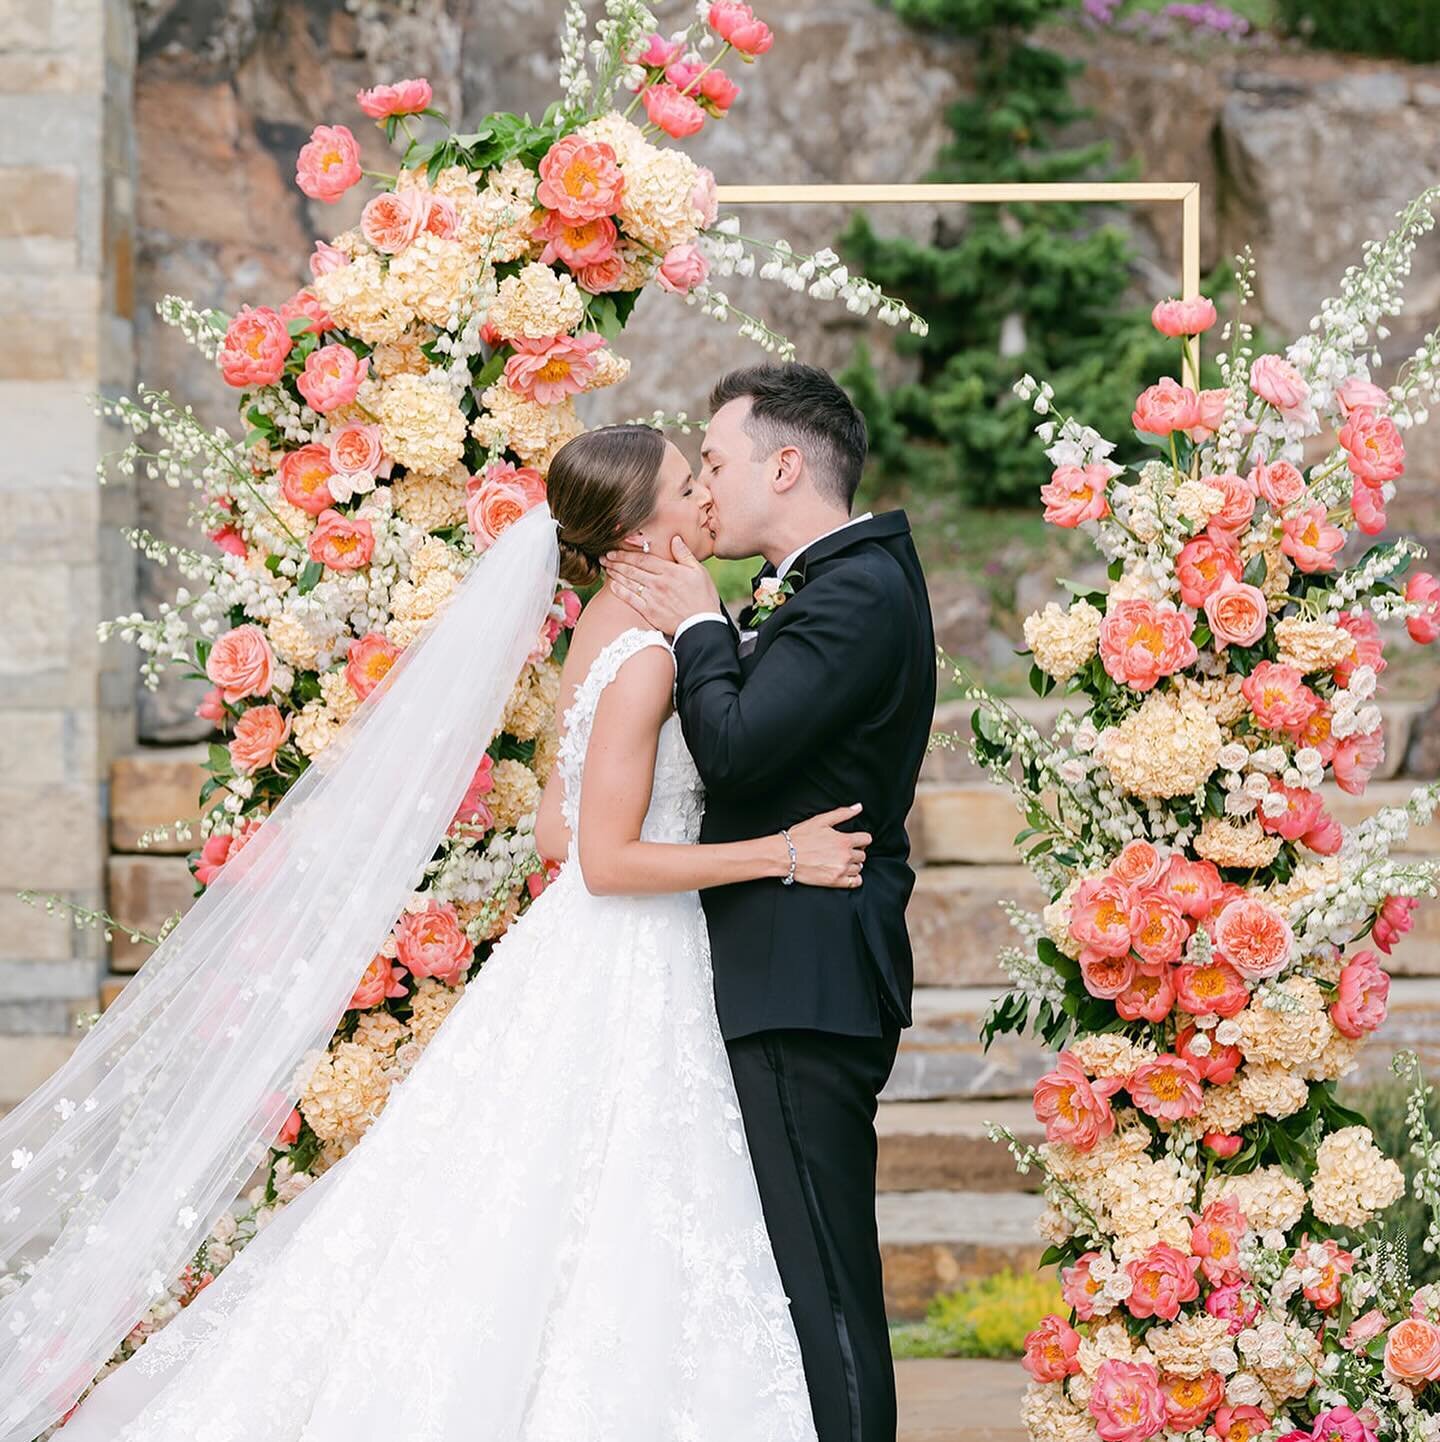 Remembering this stunning June day 😍 Eliza&rsquo;s vision included luxurious blooms and loads of color 🌸❤️ We are so honored to have this beautifully featured in the newest edition of @utahbridemag 🥰 check out the full story in their stunning new 